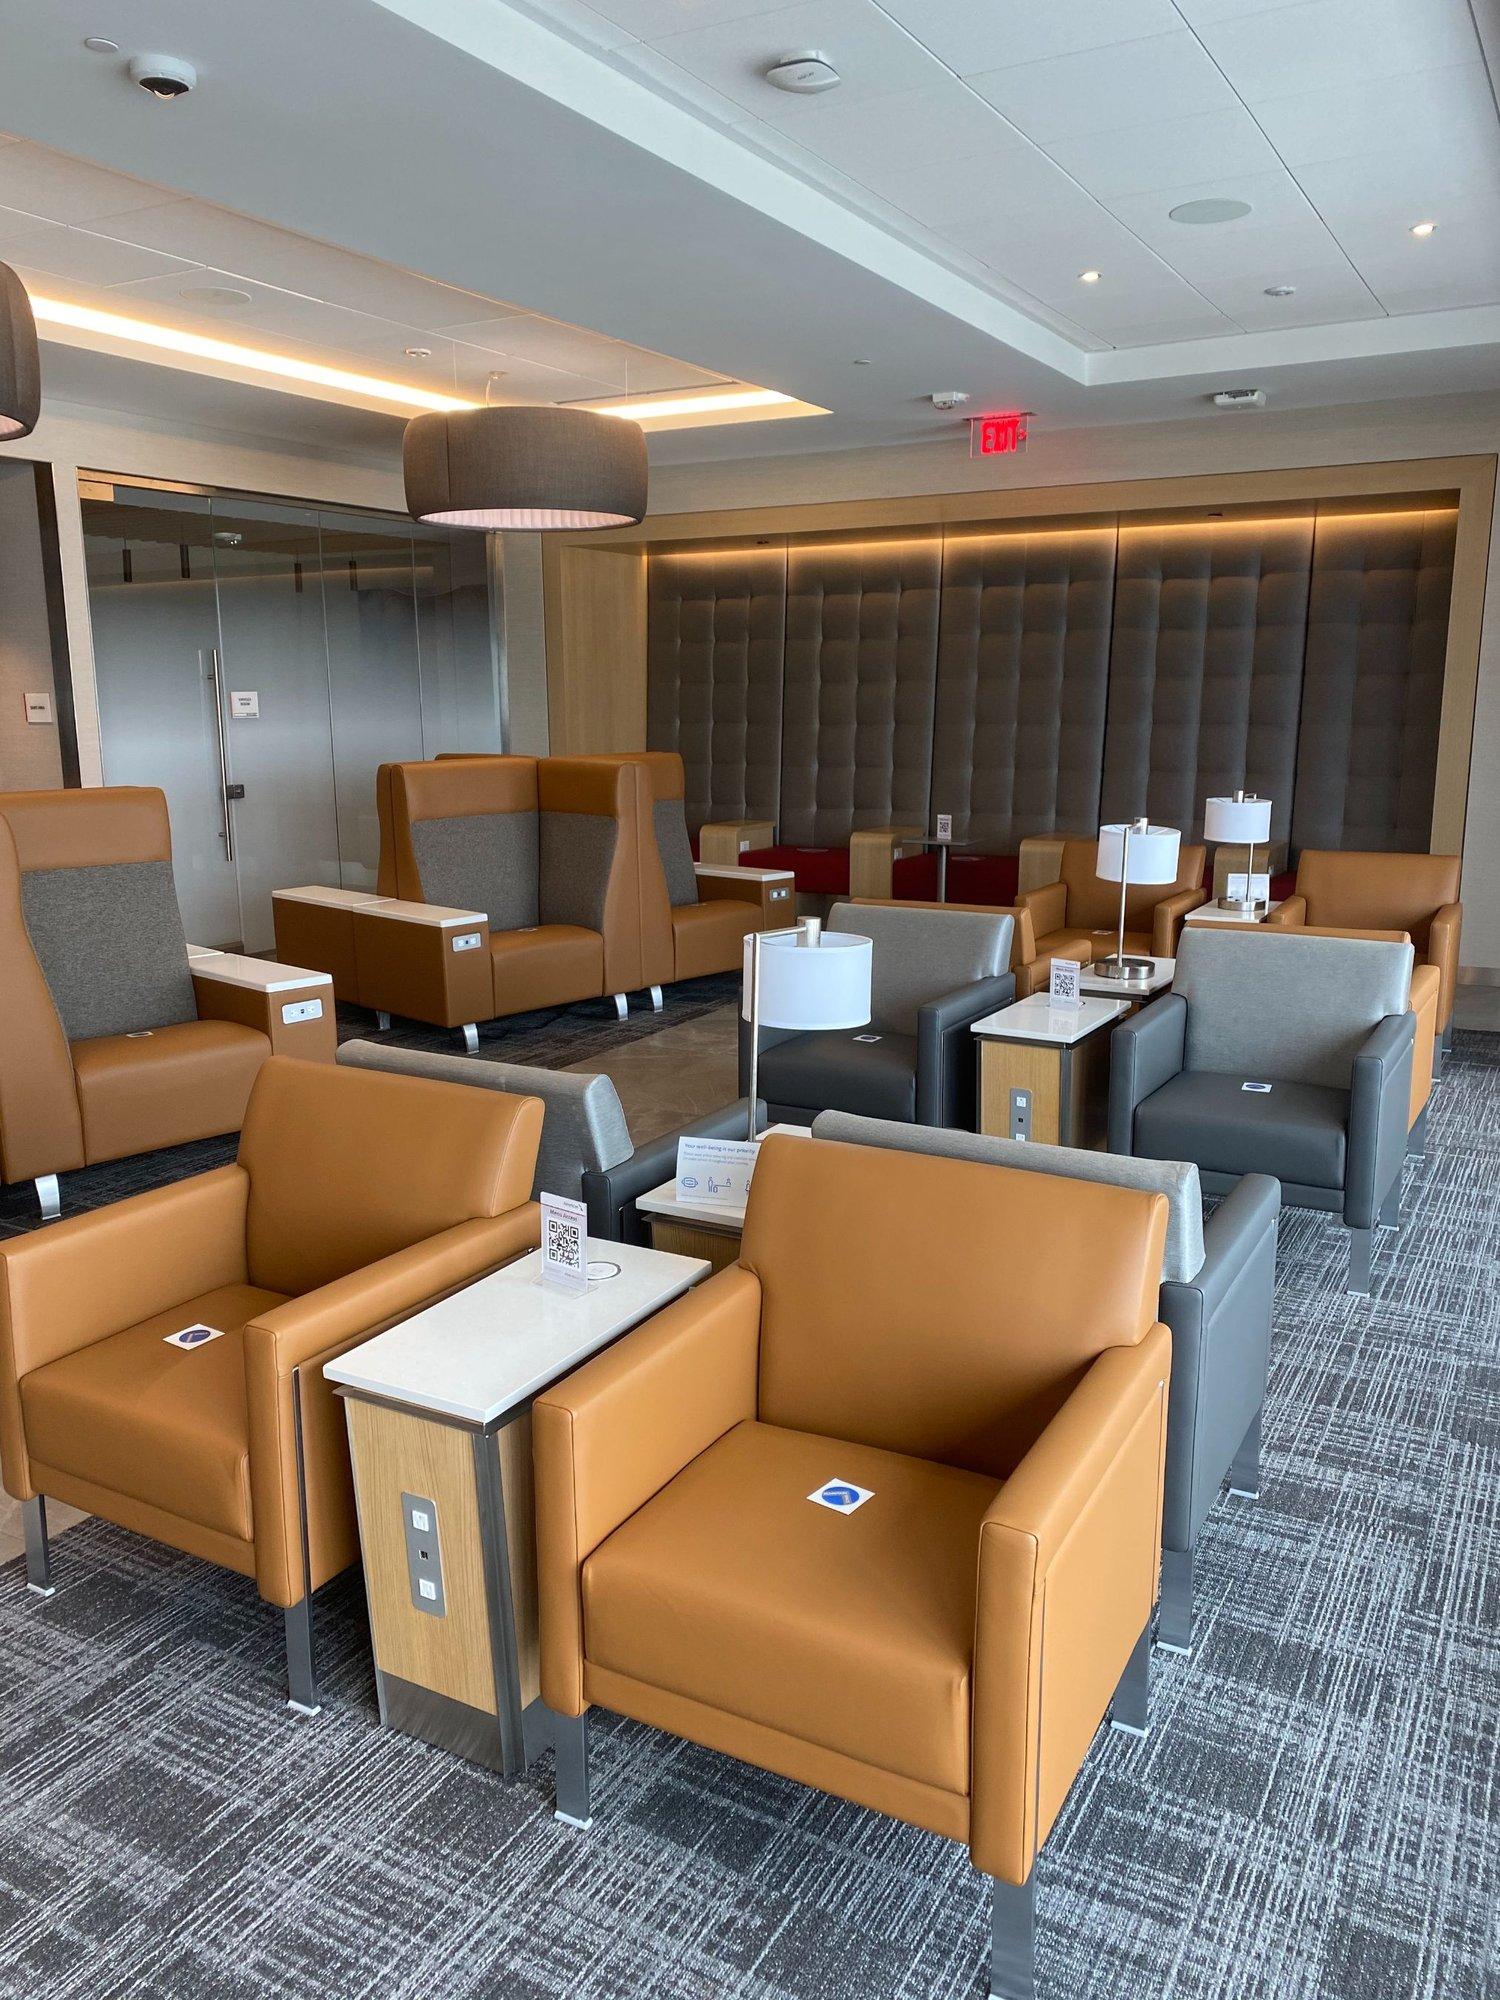 American Airlines Admirals Club image 4 of 4